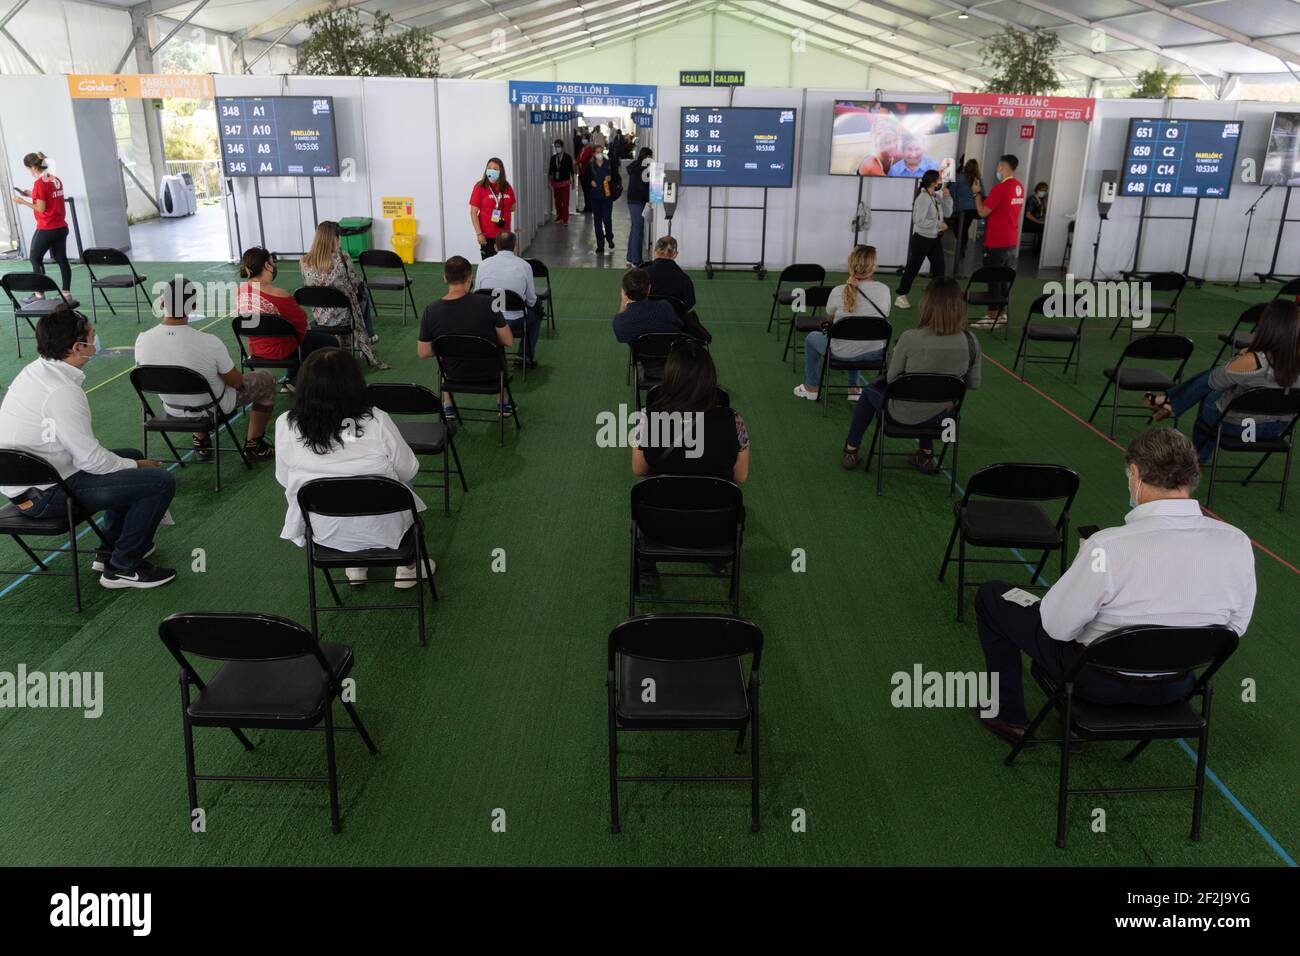 Santiago, Metropolitana, Chile. 12th Mar, 2021. People waiting to be called to receive the Sinovac vaccine against the coronavirus, in a vaccination center set up in a park in Santiago. Credit: Matias Basualdo/ZUMA Wire/Alamy Live News Stock Photo